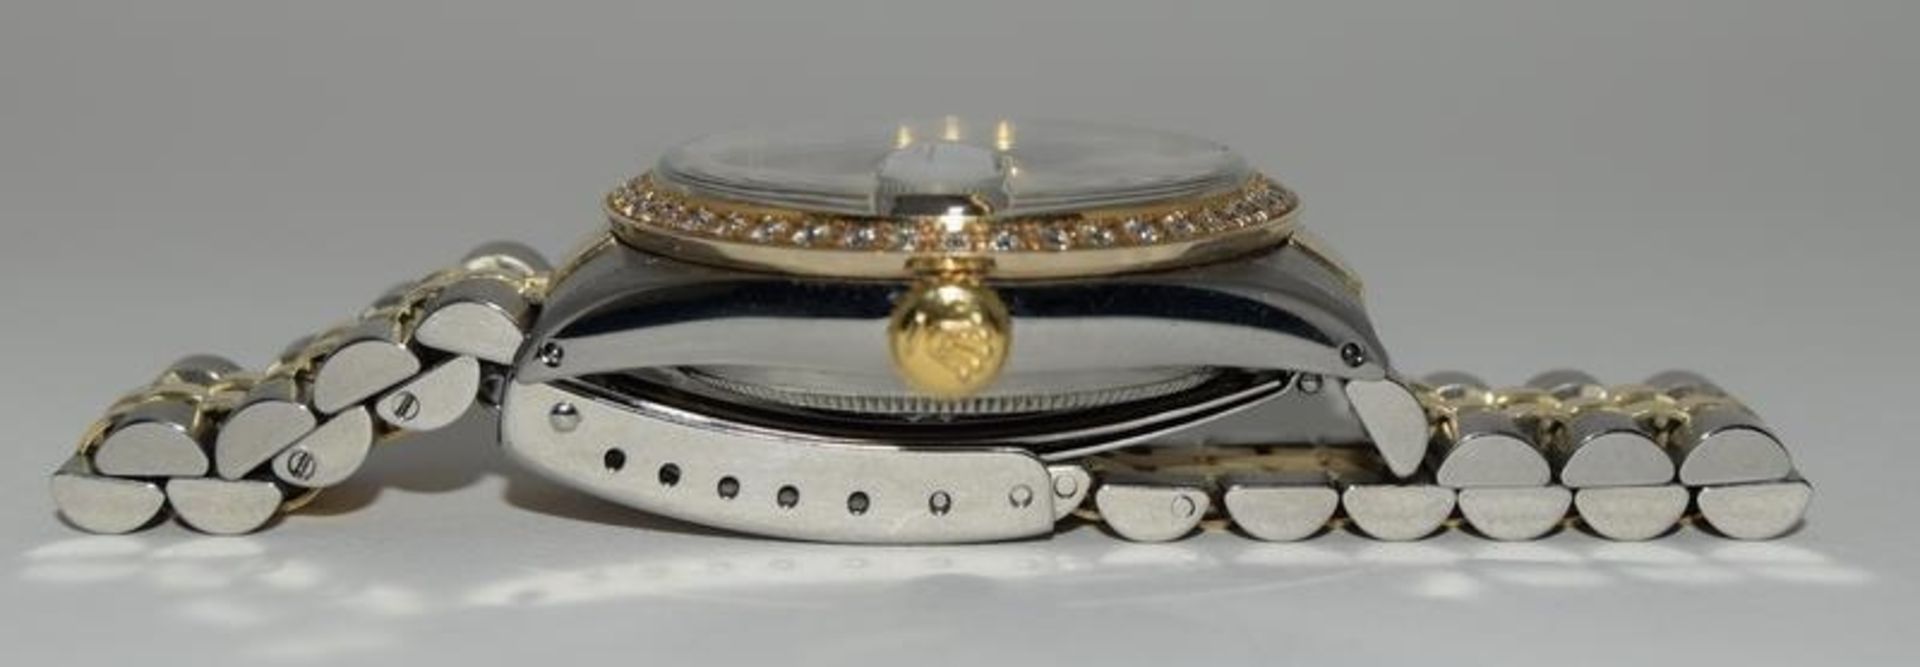 Rolex datejust diamond bezel and dial, mother of pearl dial, Bi-Metal wrist watch. (ref 106) - Image 2 of 10